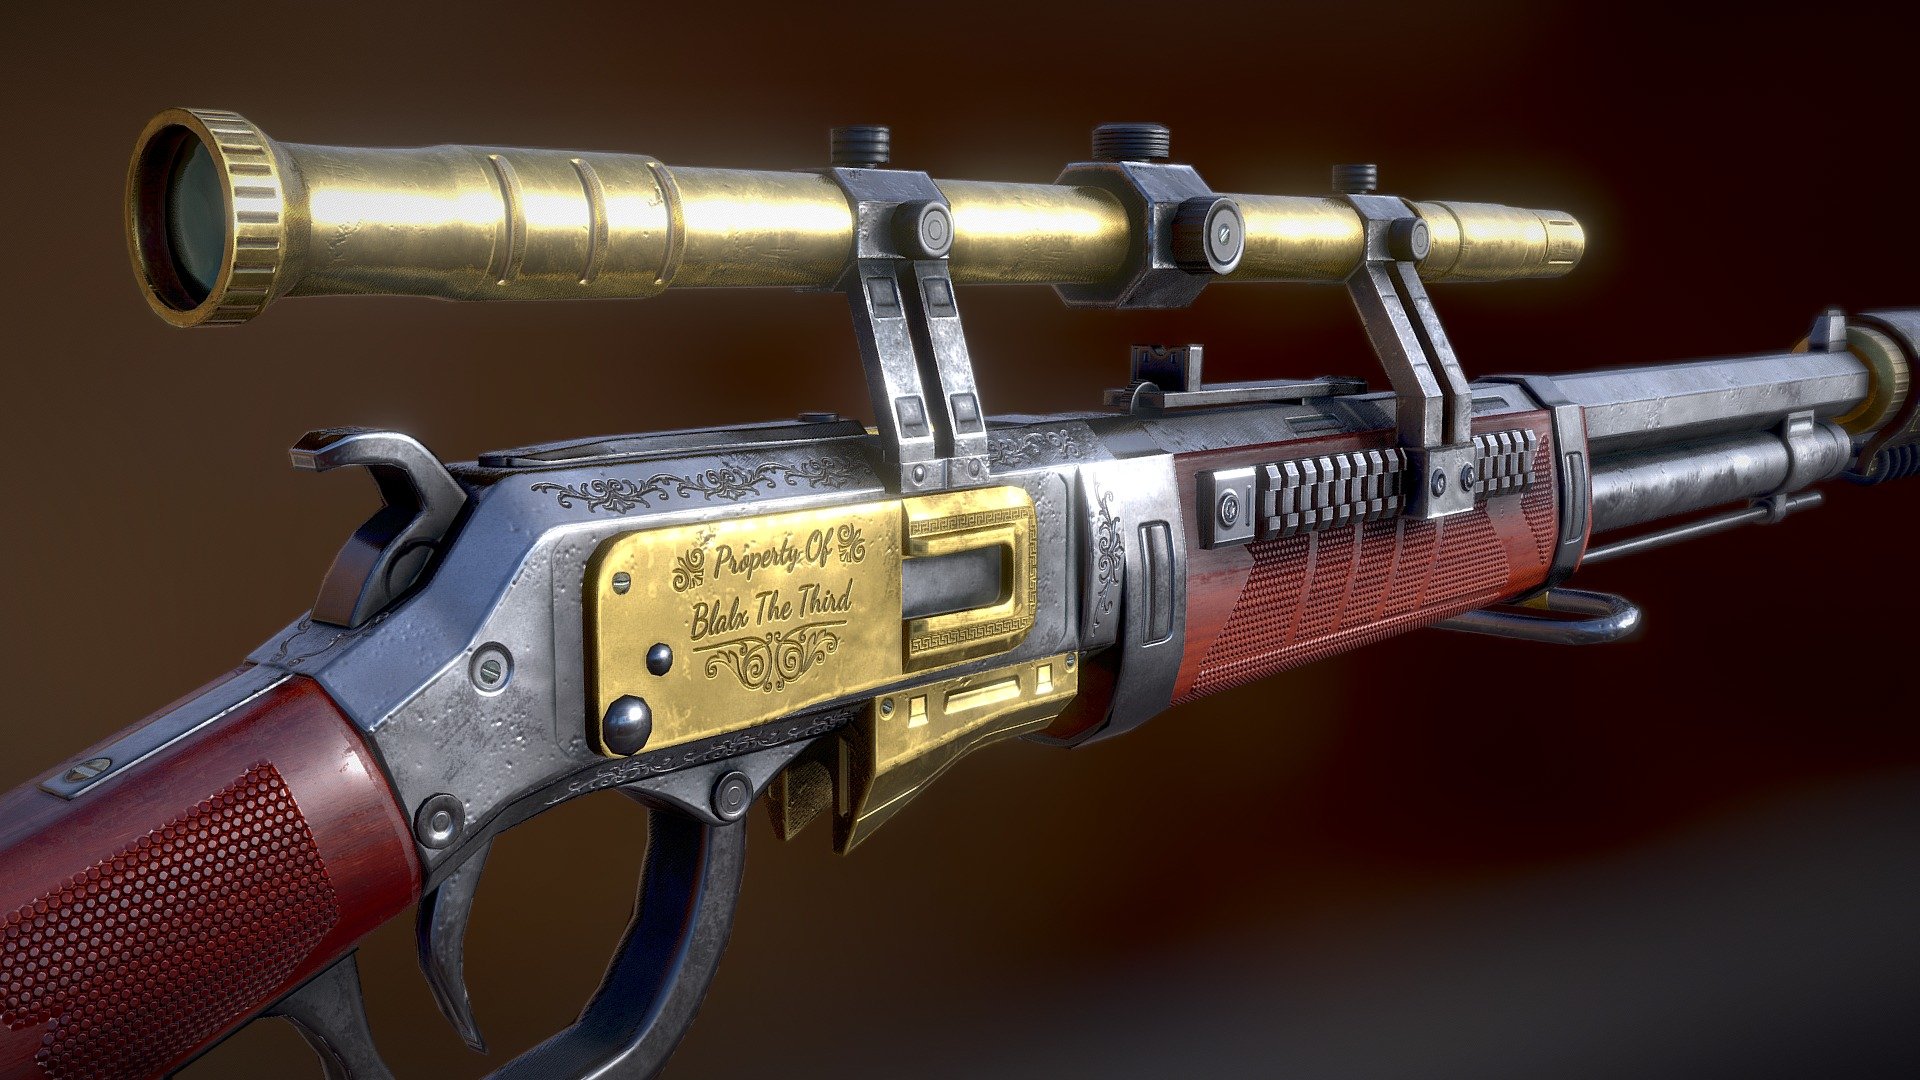 Game ready featuring 4k PBR textures for the main weapon and separated texture sets for the leather saddle, bullets and scope.

Total Polycount 15964 Tris without silencer (23,332 tris with silencer and it's leather wrapping)

Modeled in blender and textured in Substance painter 3d model